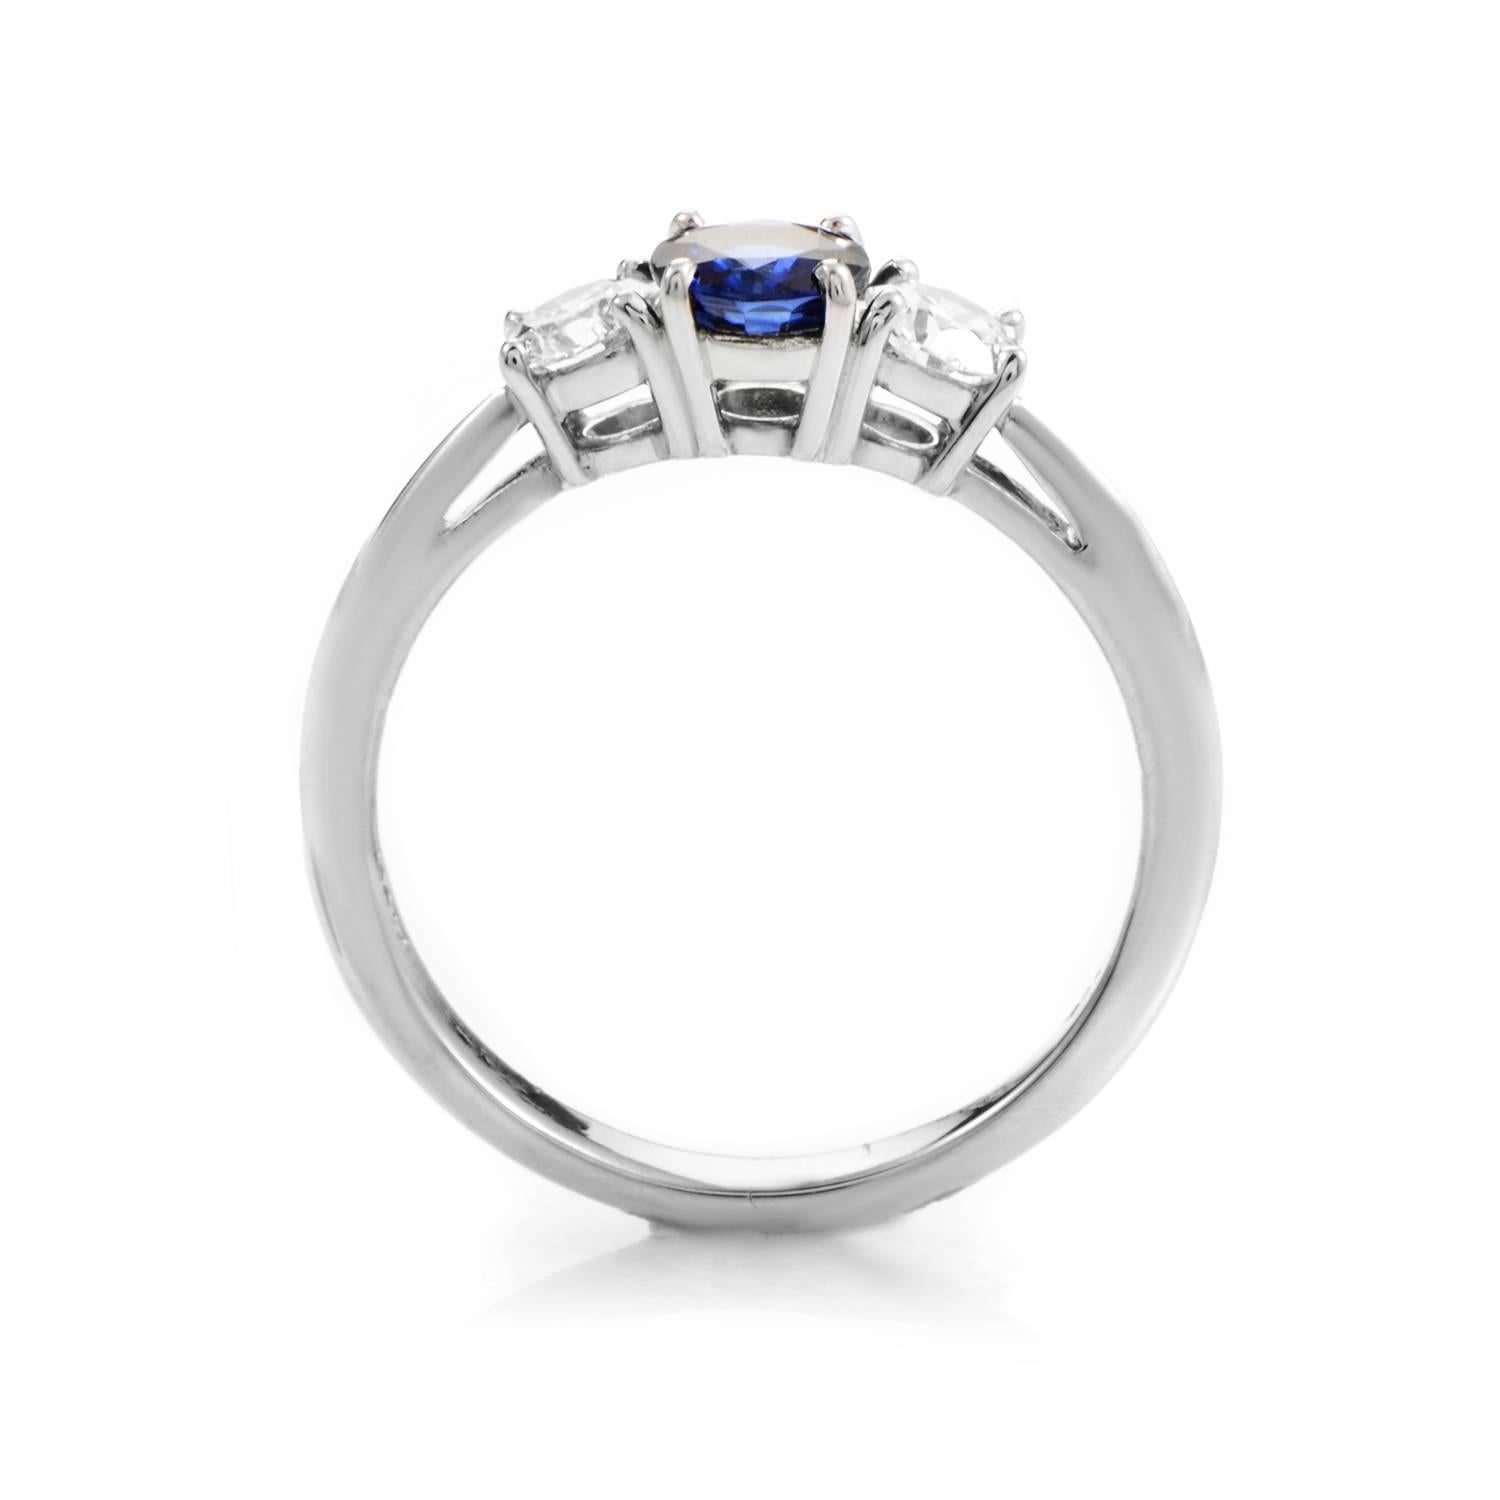 Tiffany & Co. combines a delightful mix of precious stones with platinum in this classically elegant design. The ring is made of platinum and boasts an alluring .50ct blue sapphire main stone. Lastly, the main stone is flanked on both sides by round